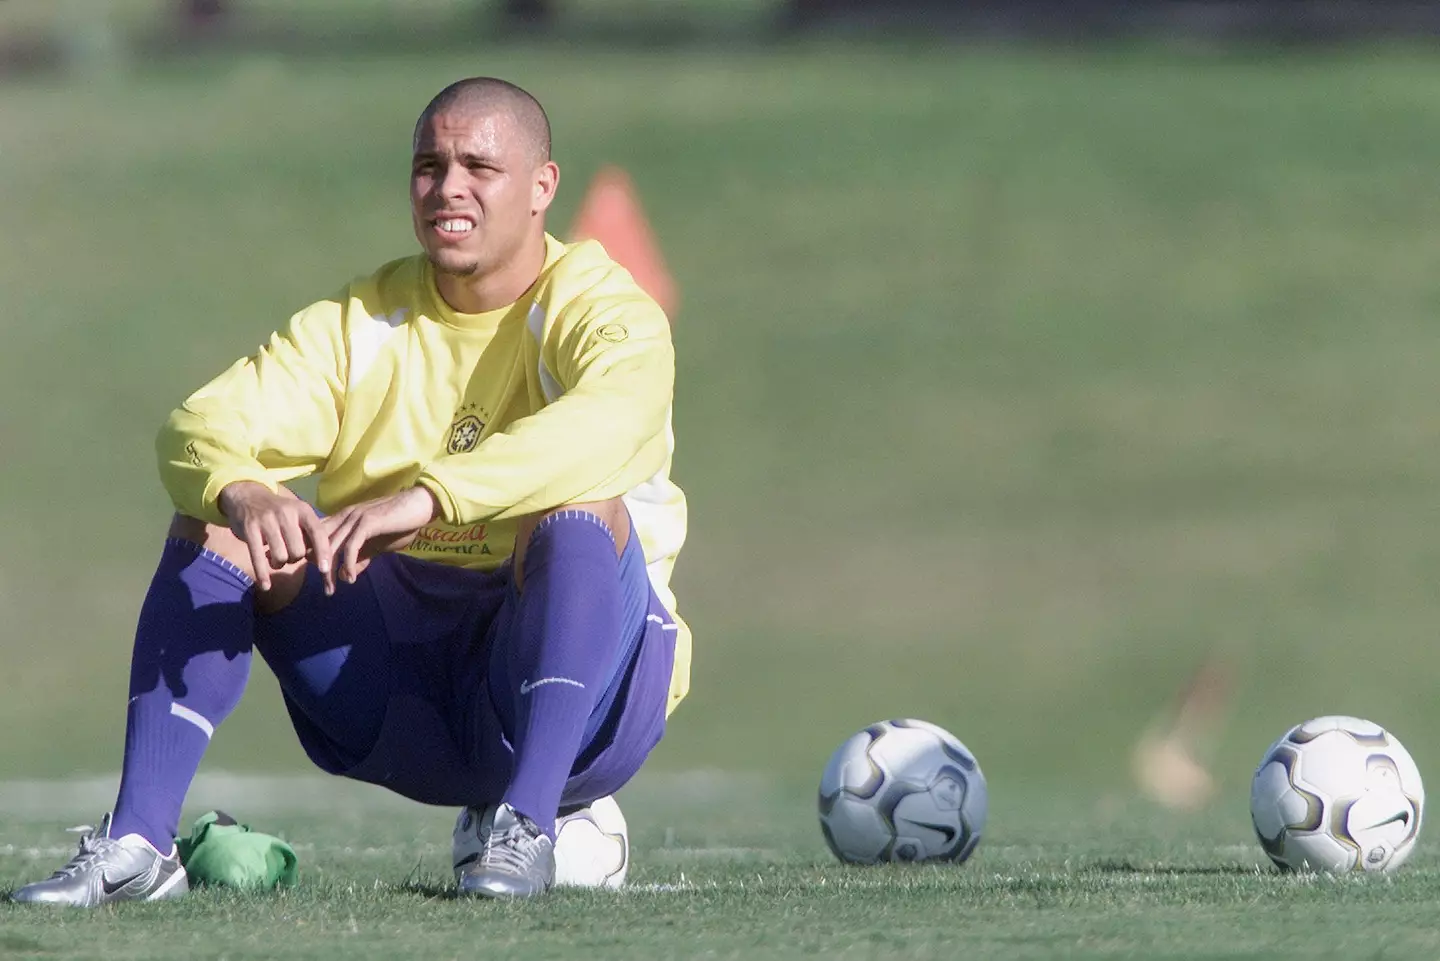 'El Fenomeno' played for some of the biggest clubs in Europe, including Barcelona and Real Madrid. (Image